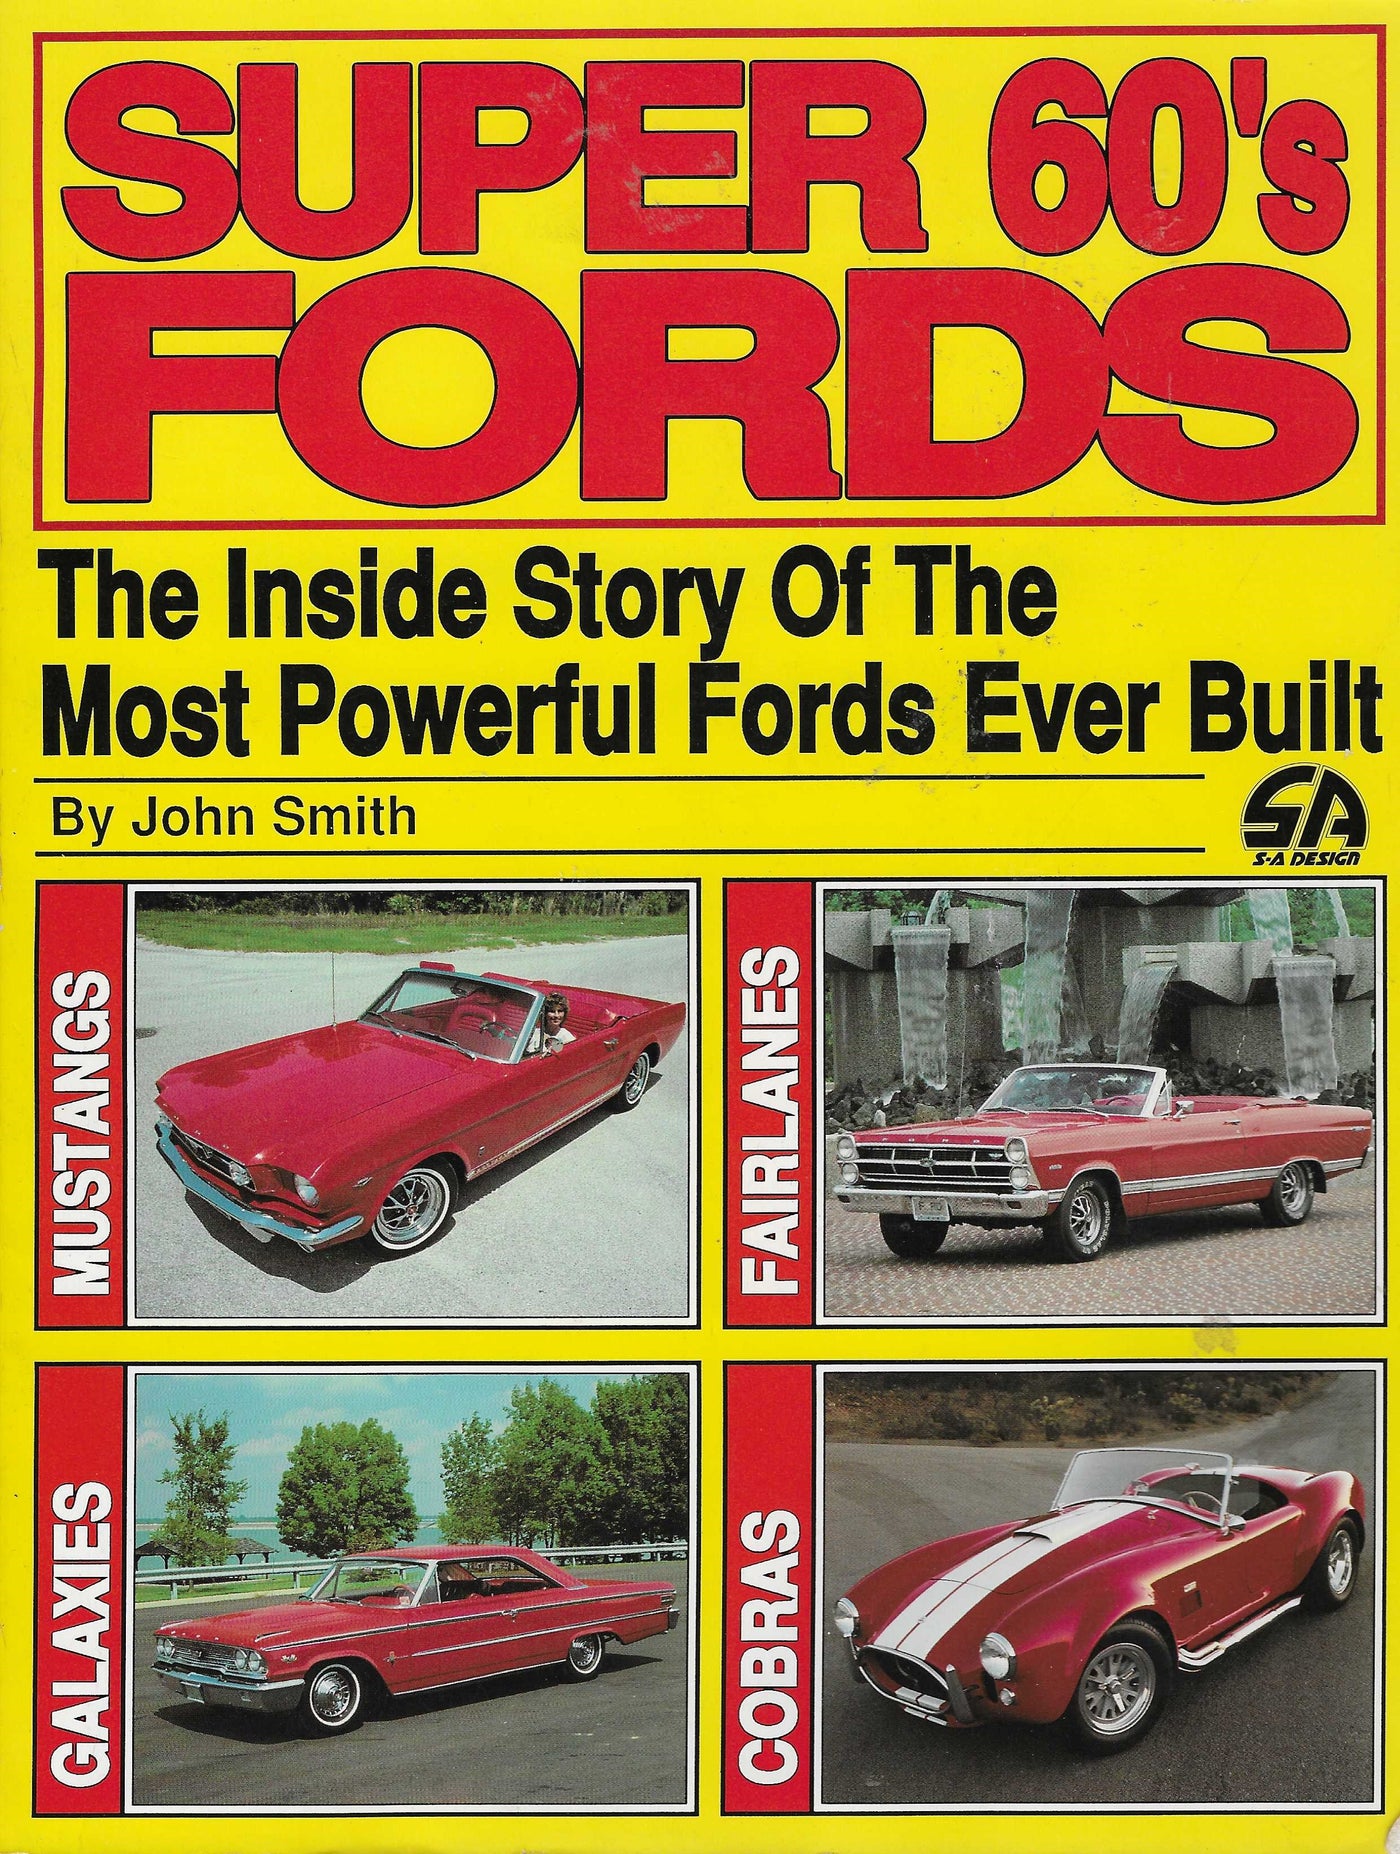 Super 60's Fords: the Inside Story of the Most Powerful Fords Ever Built